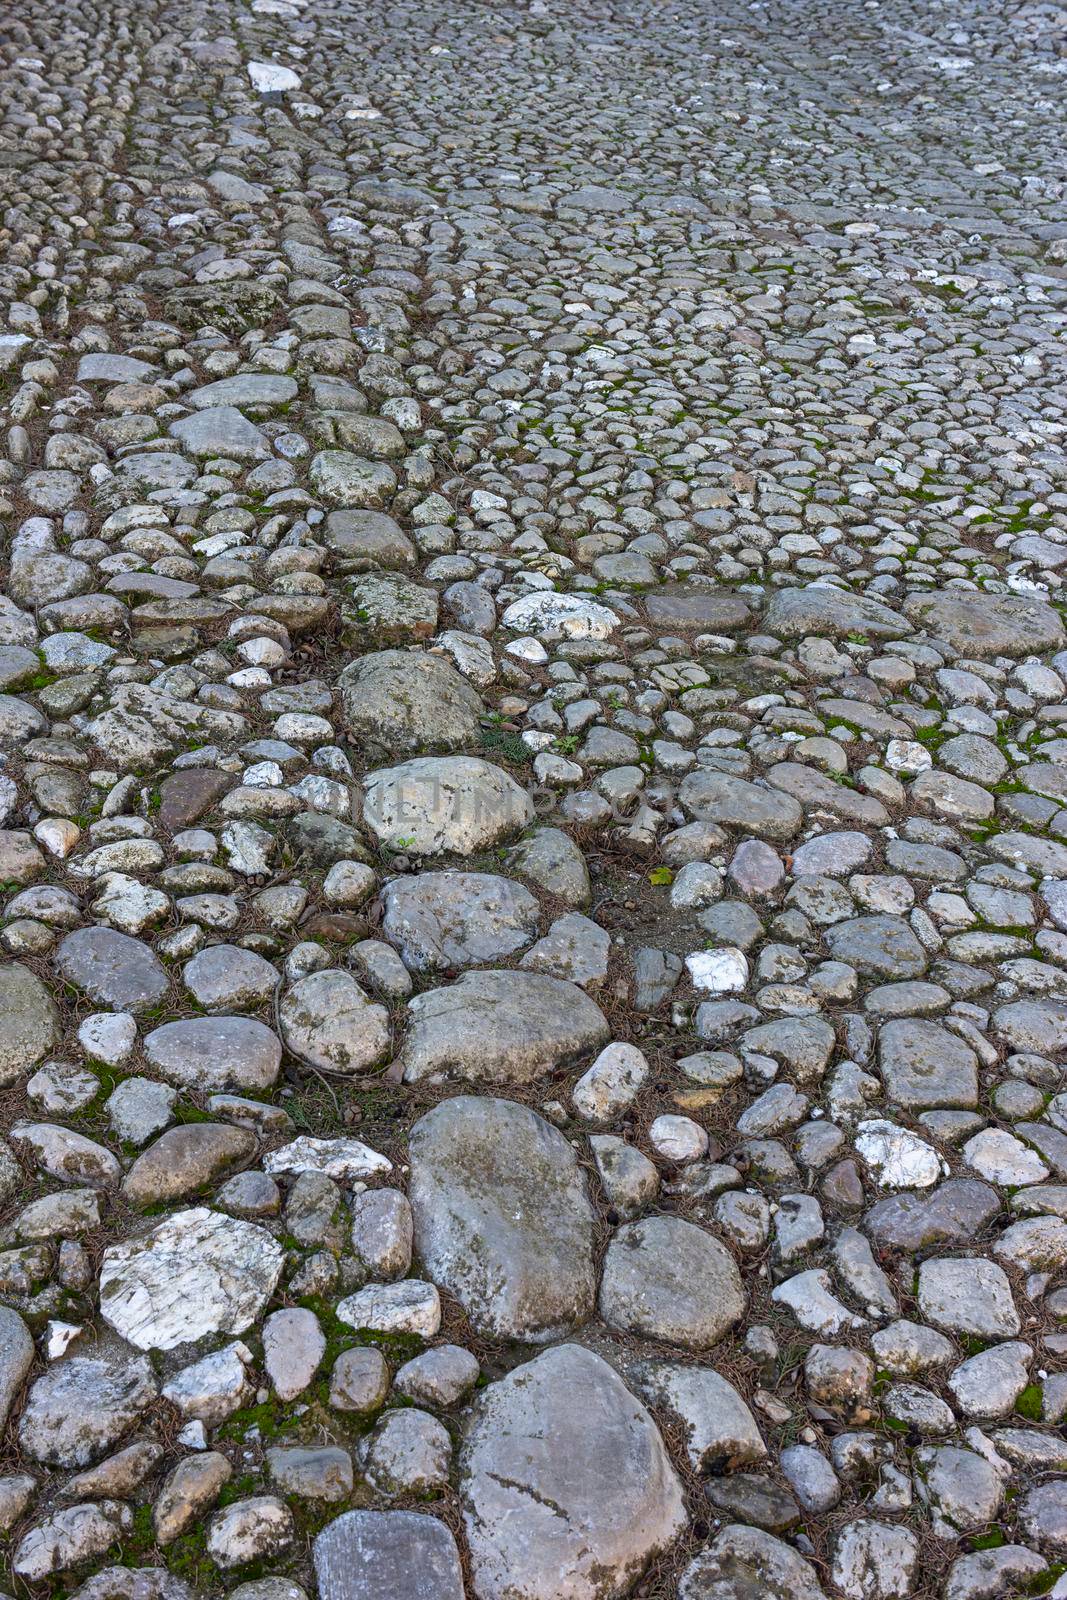 Old stone paved road in Gerona, Catalonia, Spain